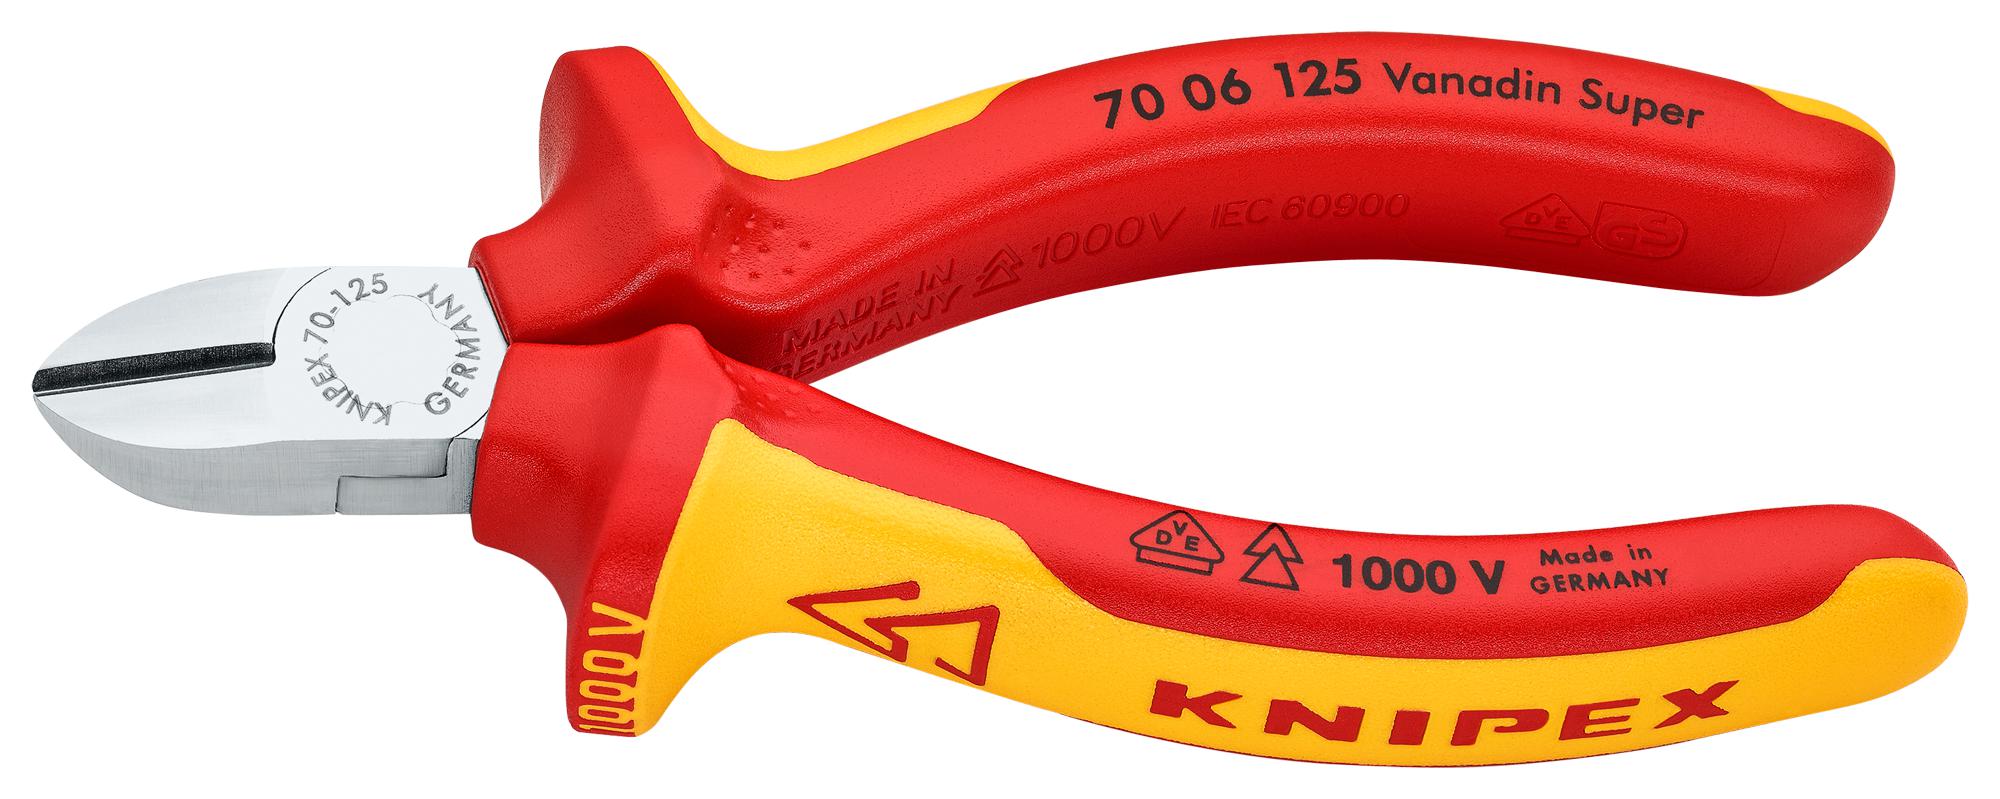 70 06 125 CUTTER, SIDE KNIPEX